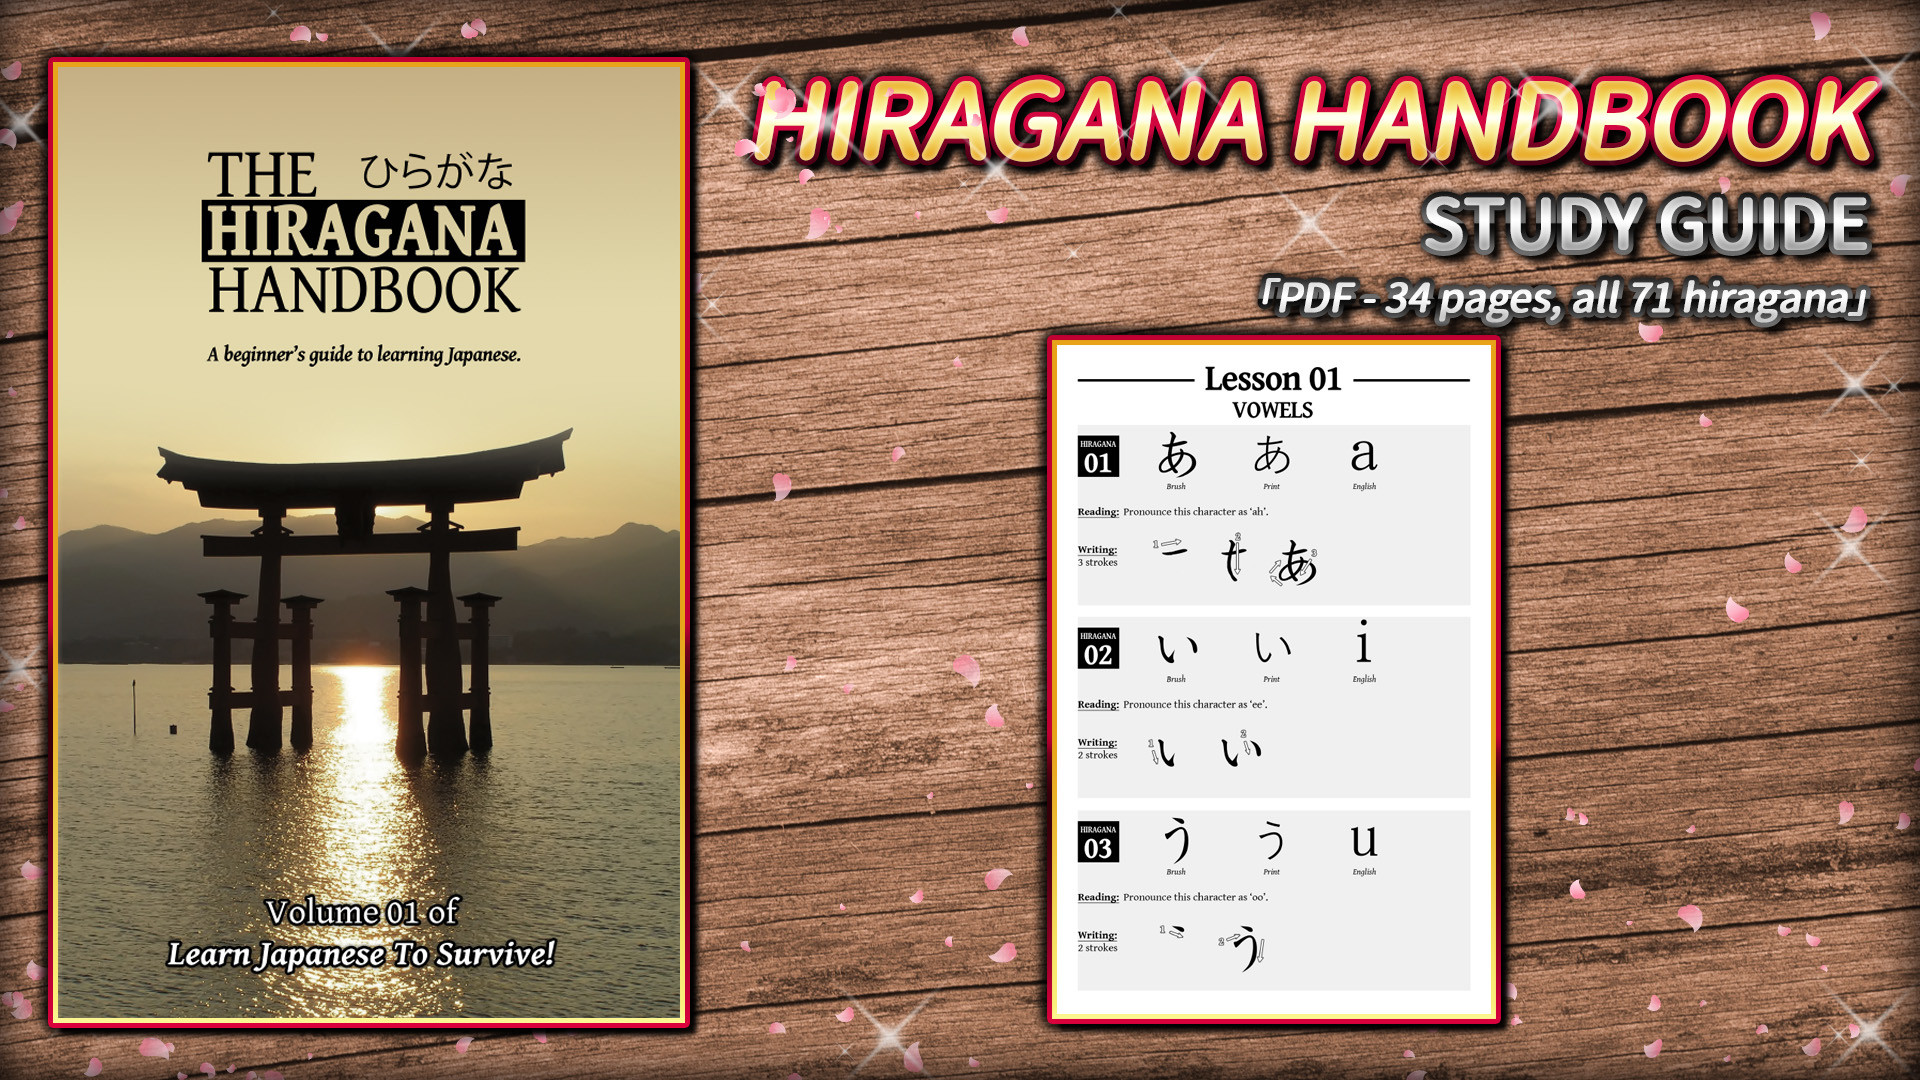 Learn Japanese To Survive - Hiragana Battle - Study Guide Featured Screenshot #1